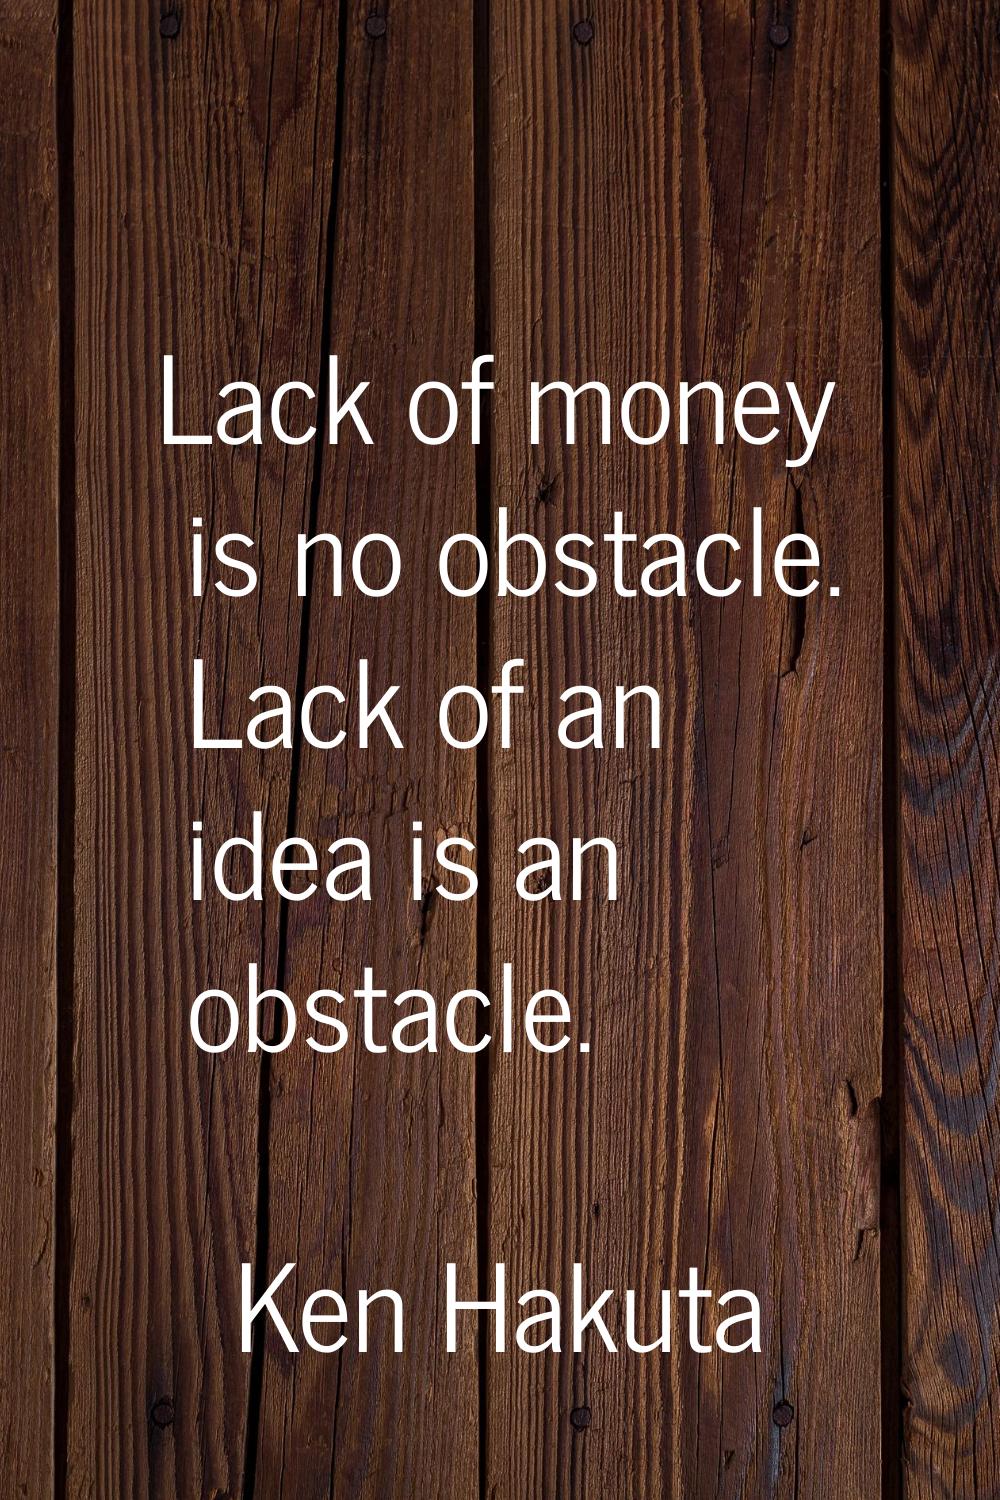 Lack of money is no obstacle. Lack of an idea is an obstacle.